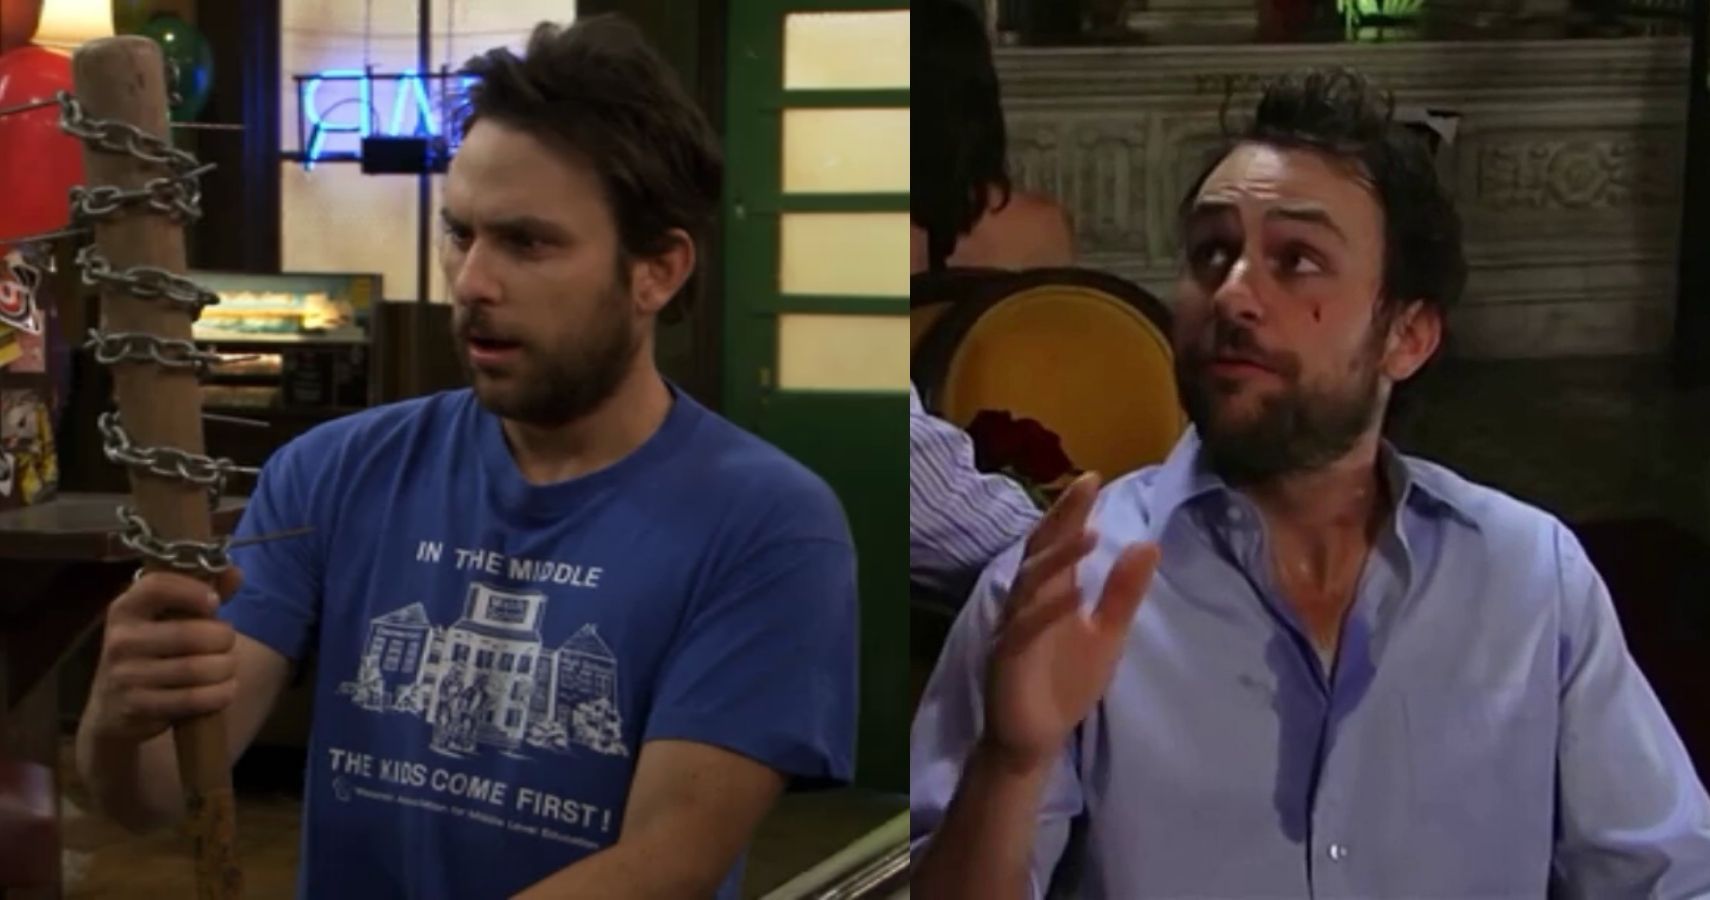 10 Best Charlie Day Movie/TV Roles, Ranked (According To IMDB)